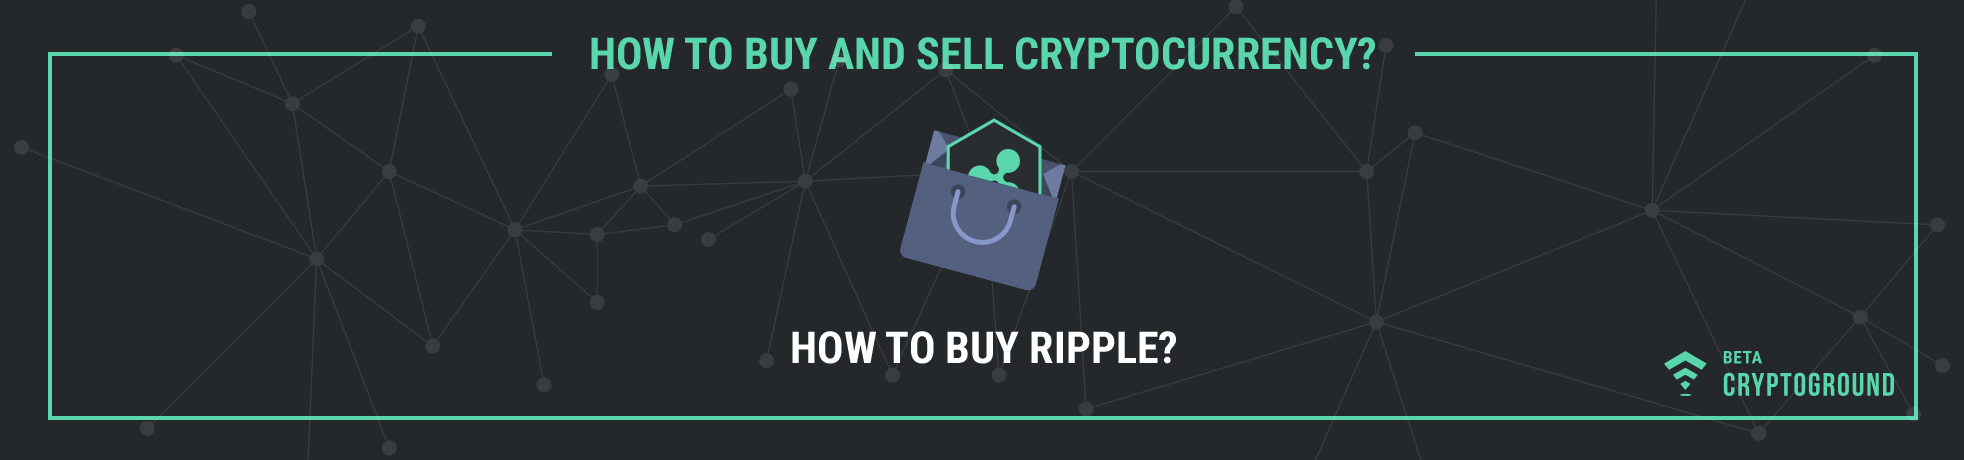 How to Buy Ripple?